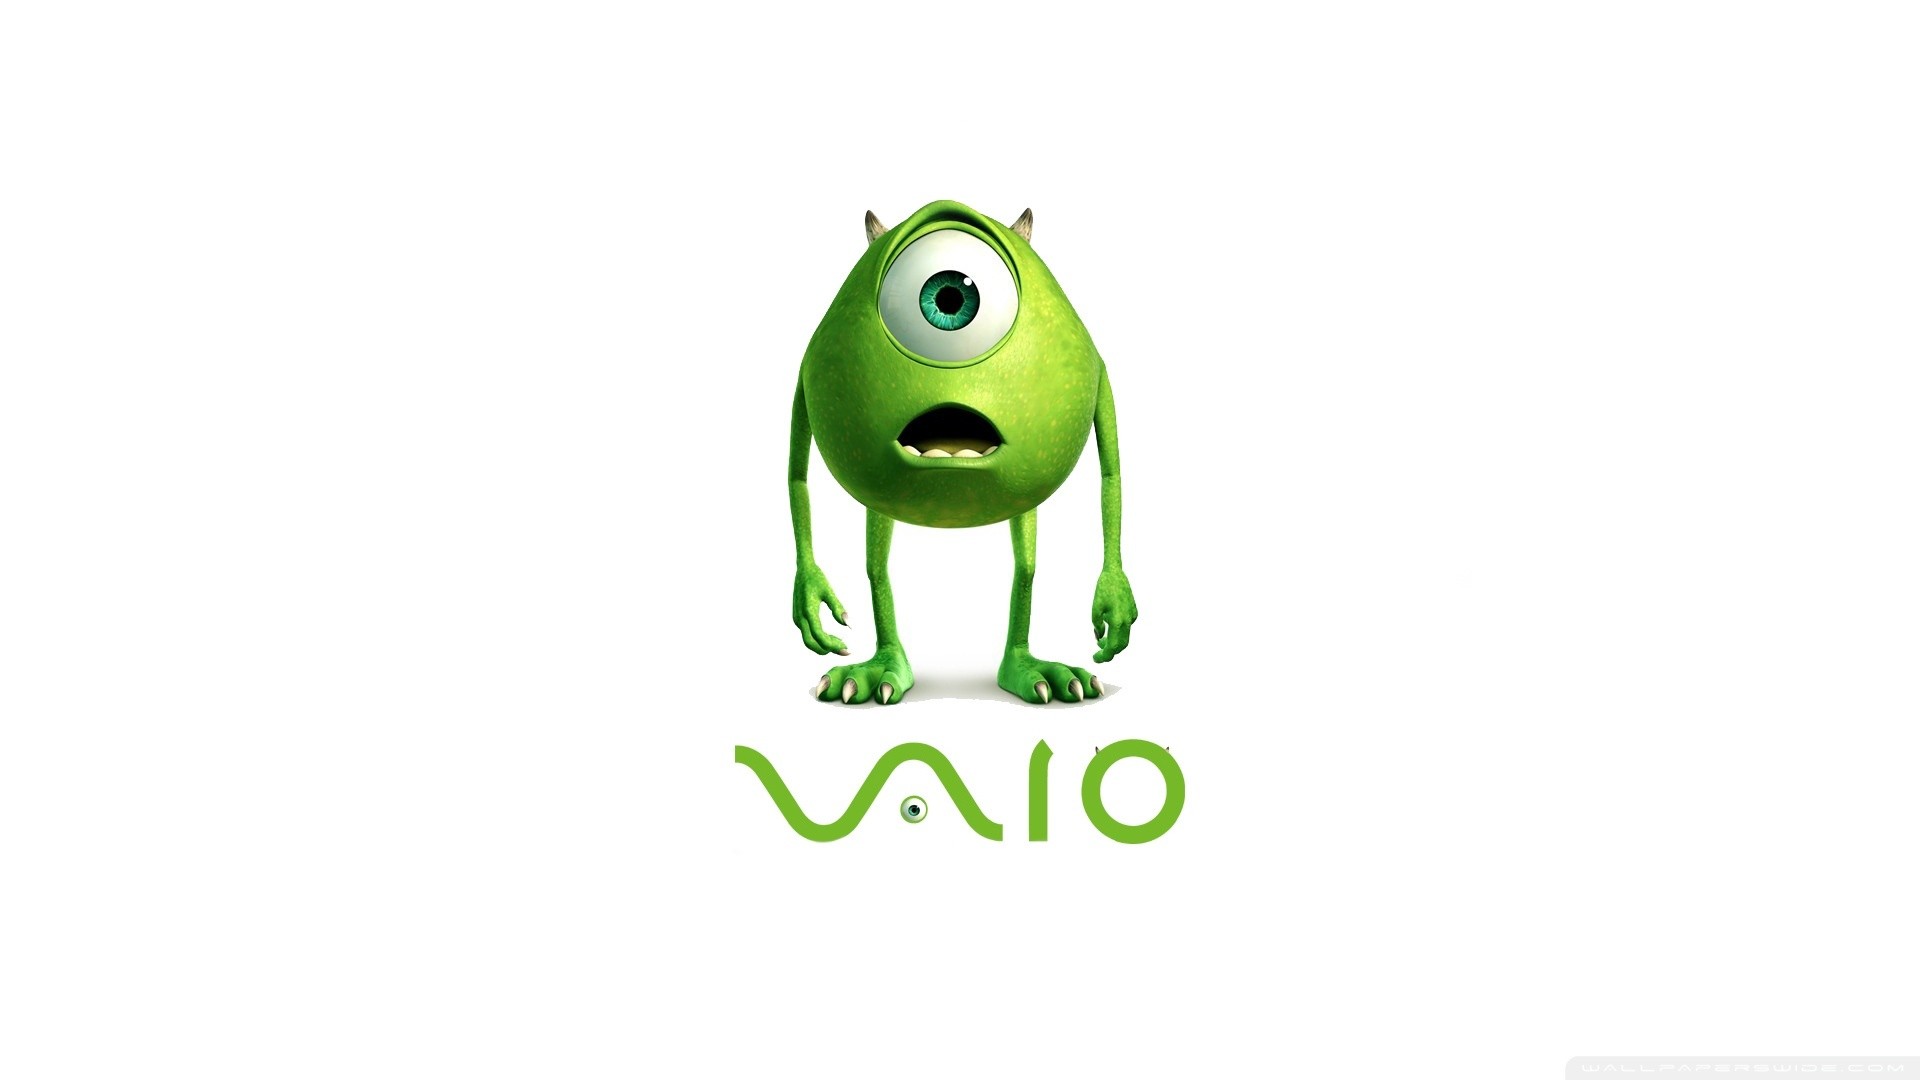 Vaio Wallpapers 1366x768 Hd 59 Images 2140